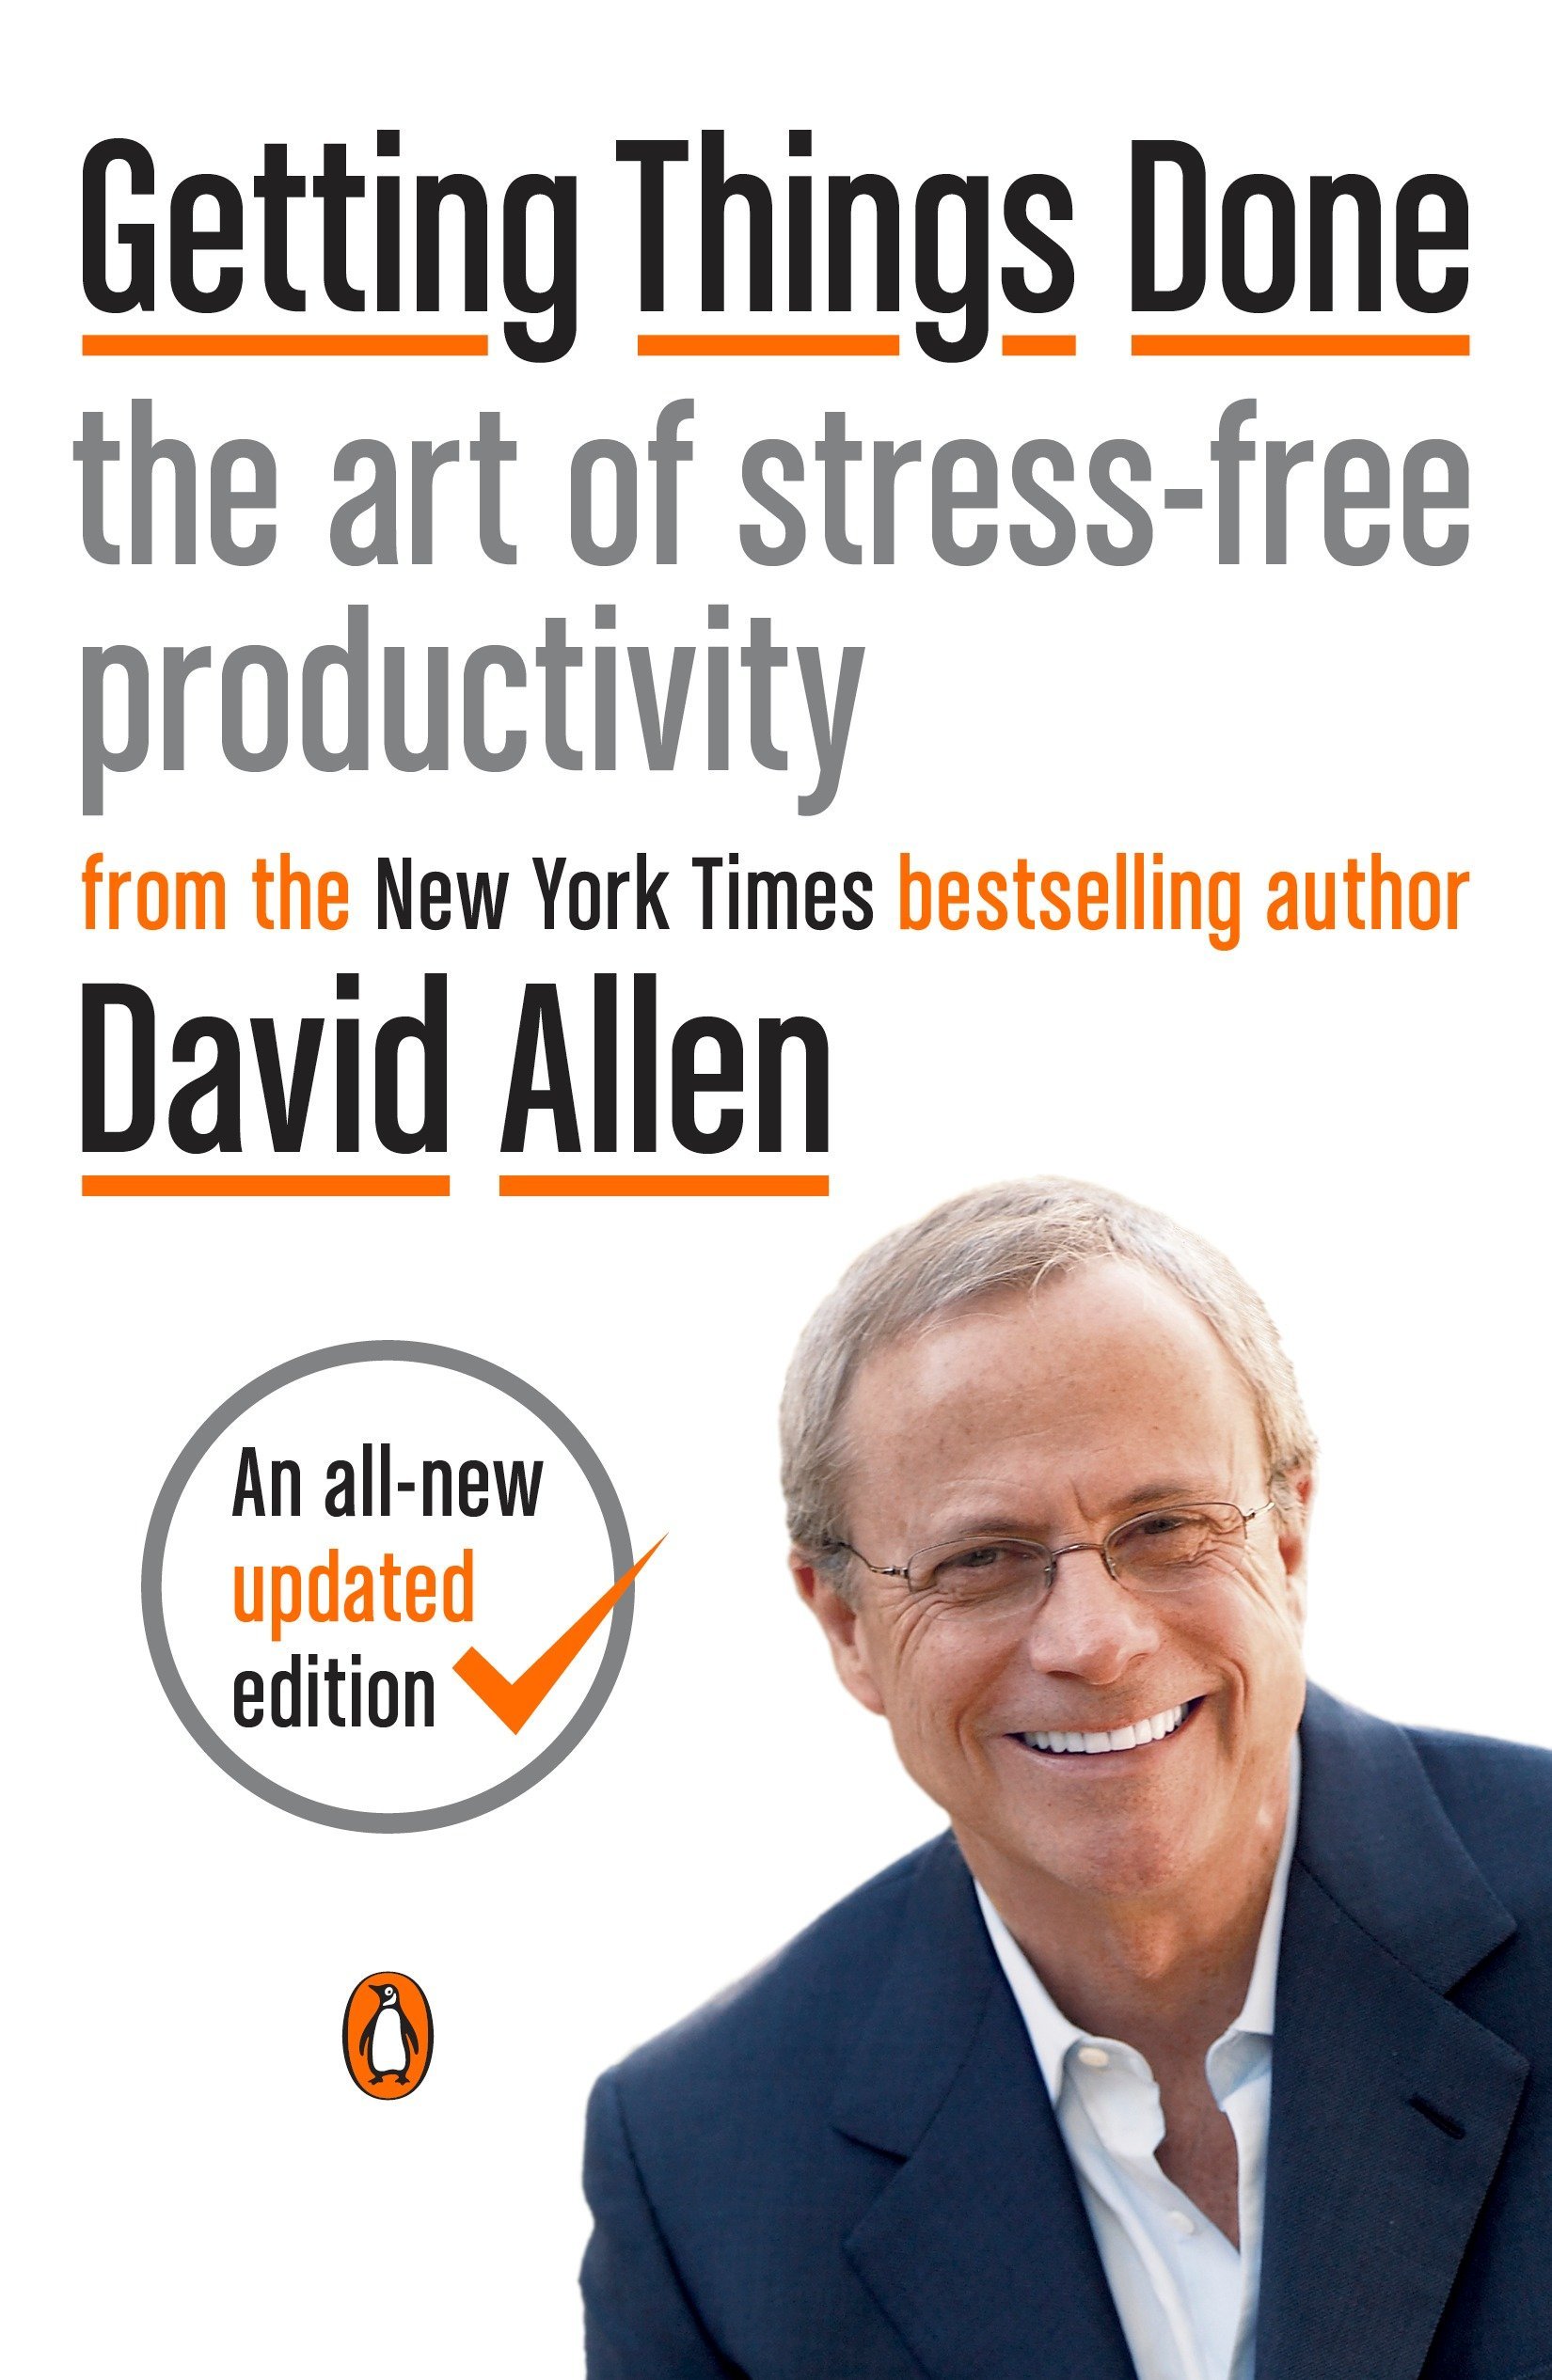 David Allen_Getting Things Done-The Art of Stress-Free Productivity.jpg